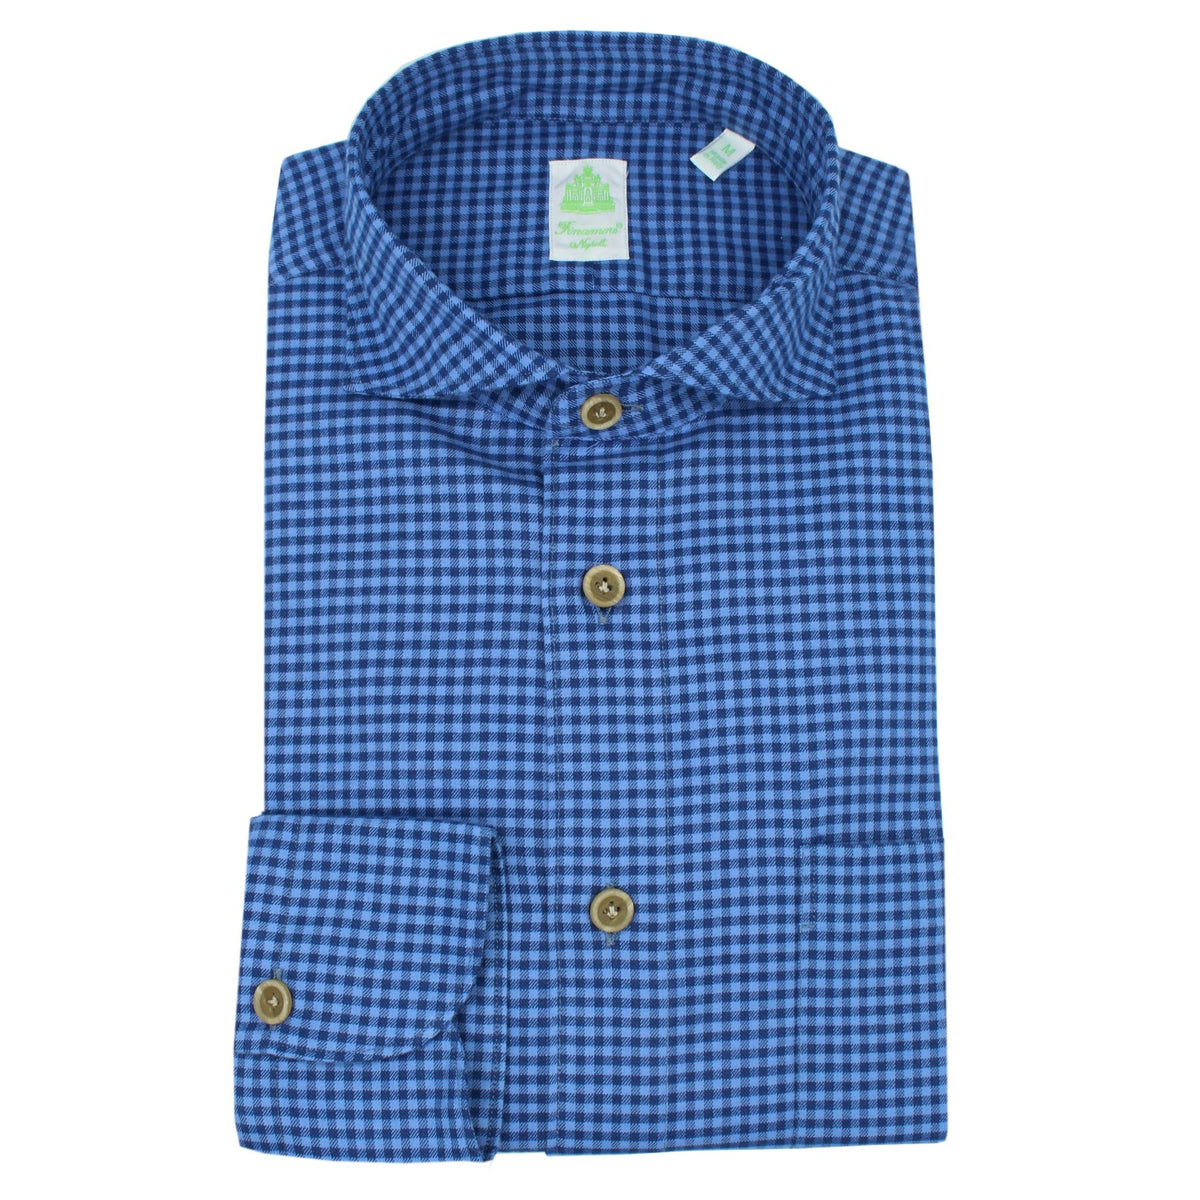 Madison slim fit sporty cotton blue and light blue checked shirt